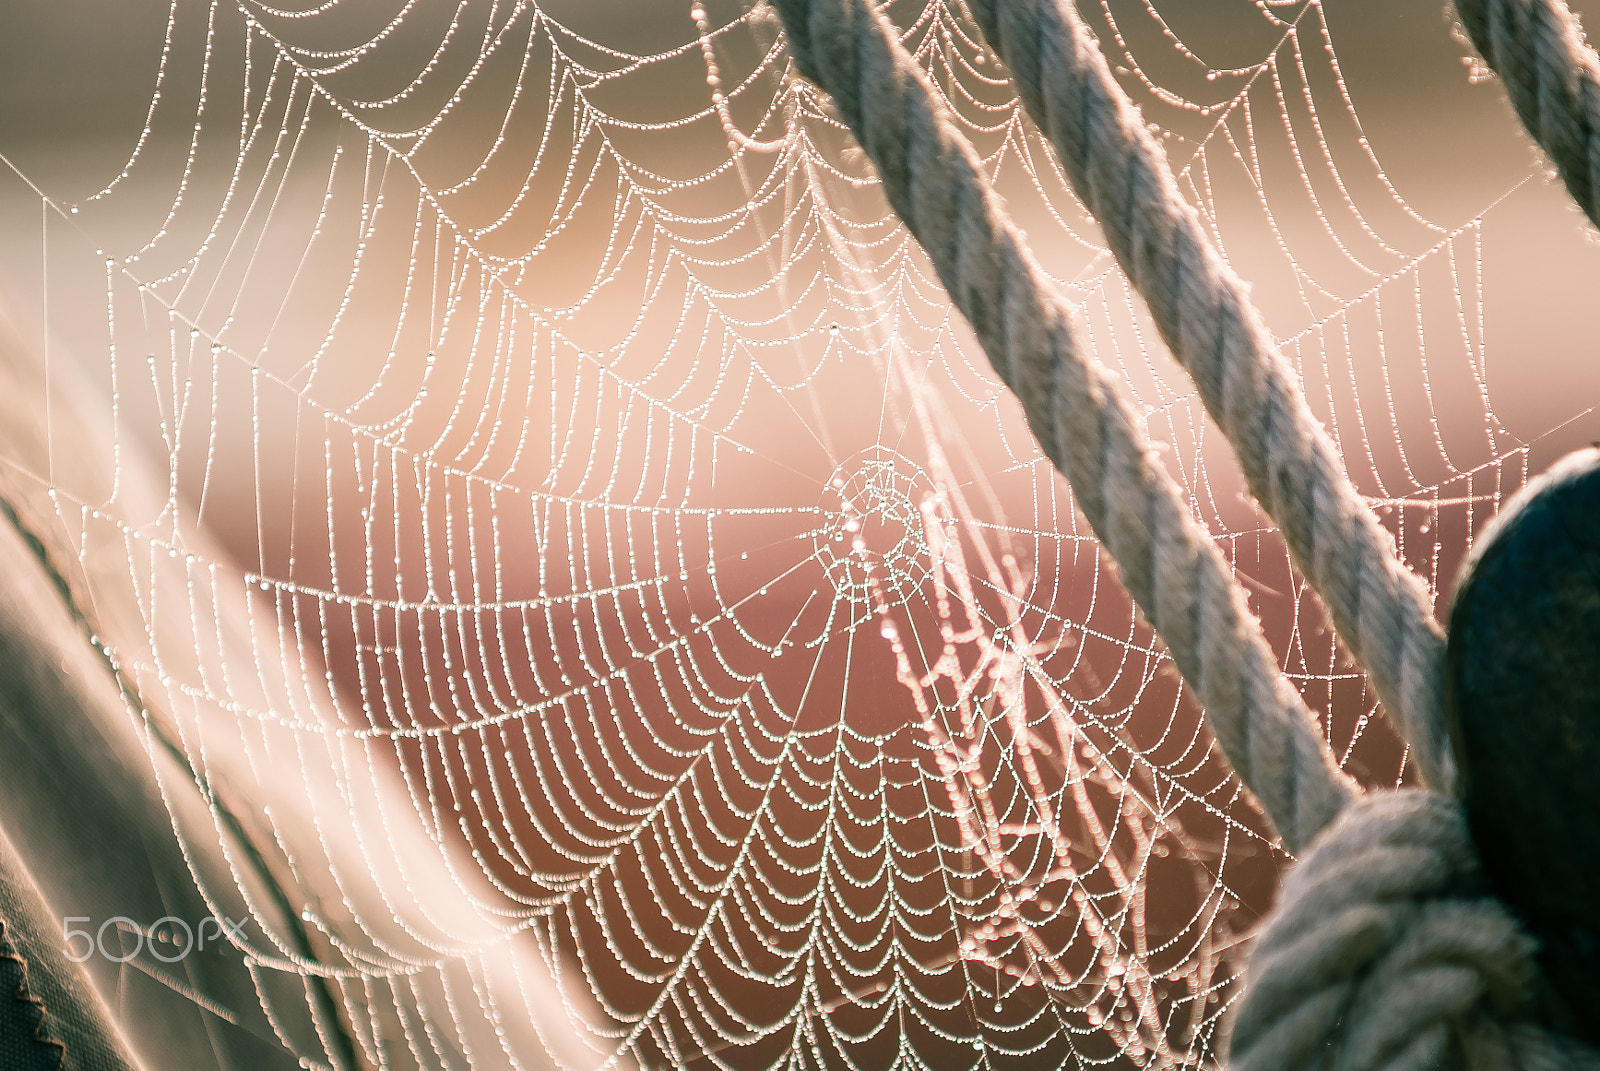 Sony Alpha DSLR-A200 sample photo. Morning dew on spiderweb sailboat detail photography